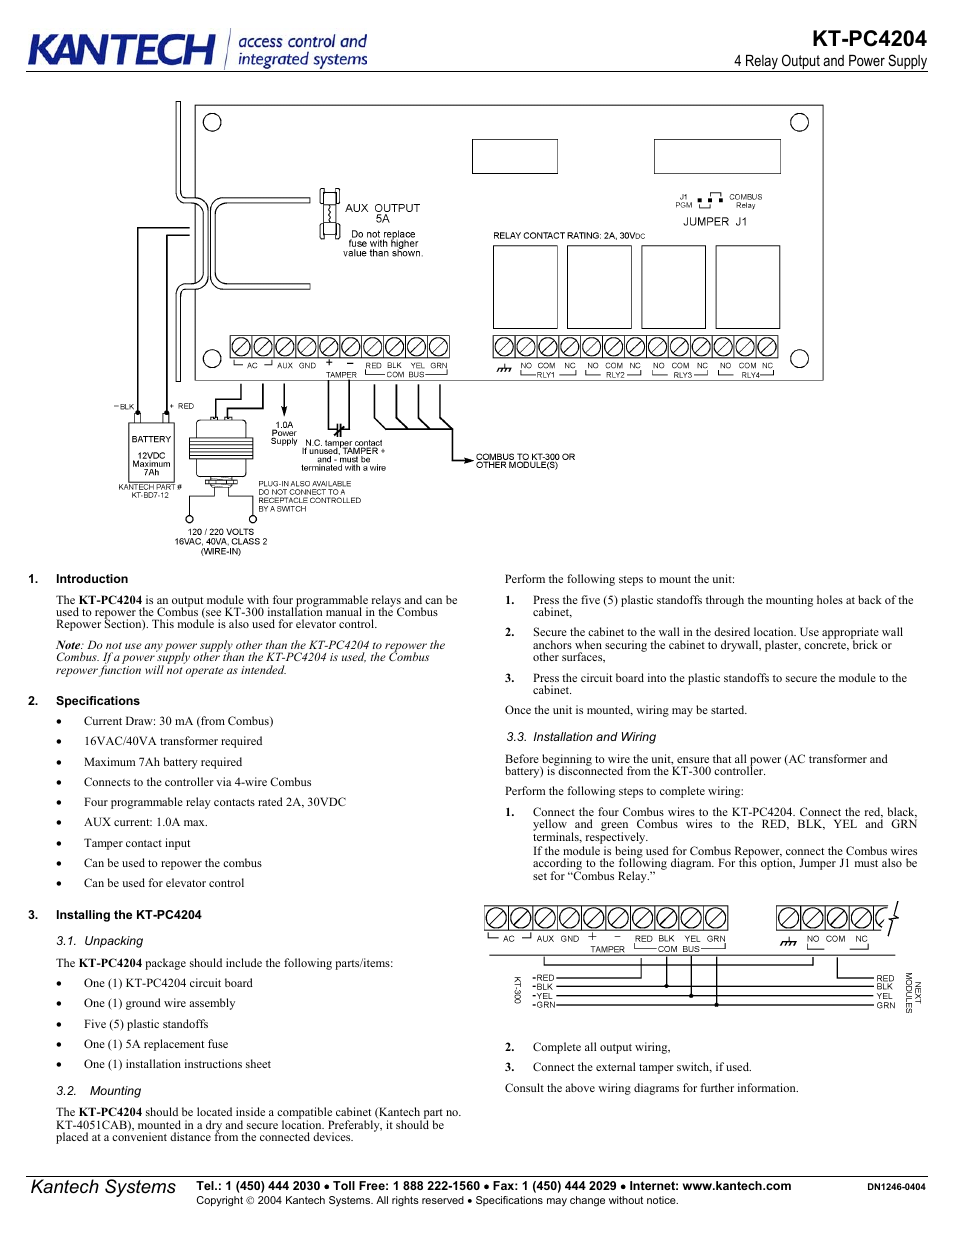 Kantech KT-PC4204 User Manual | 2 pages